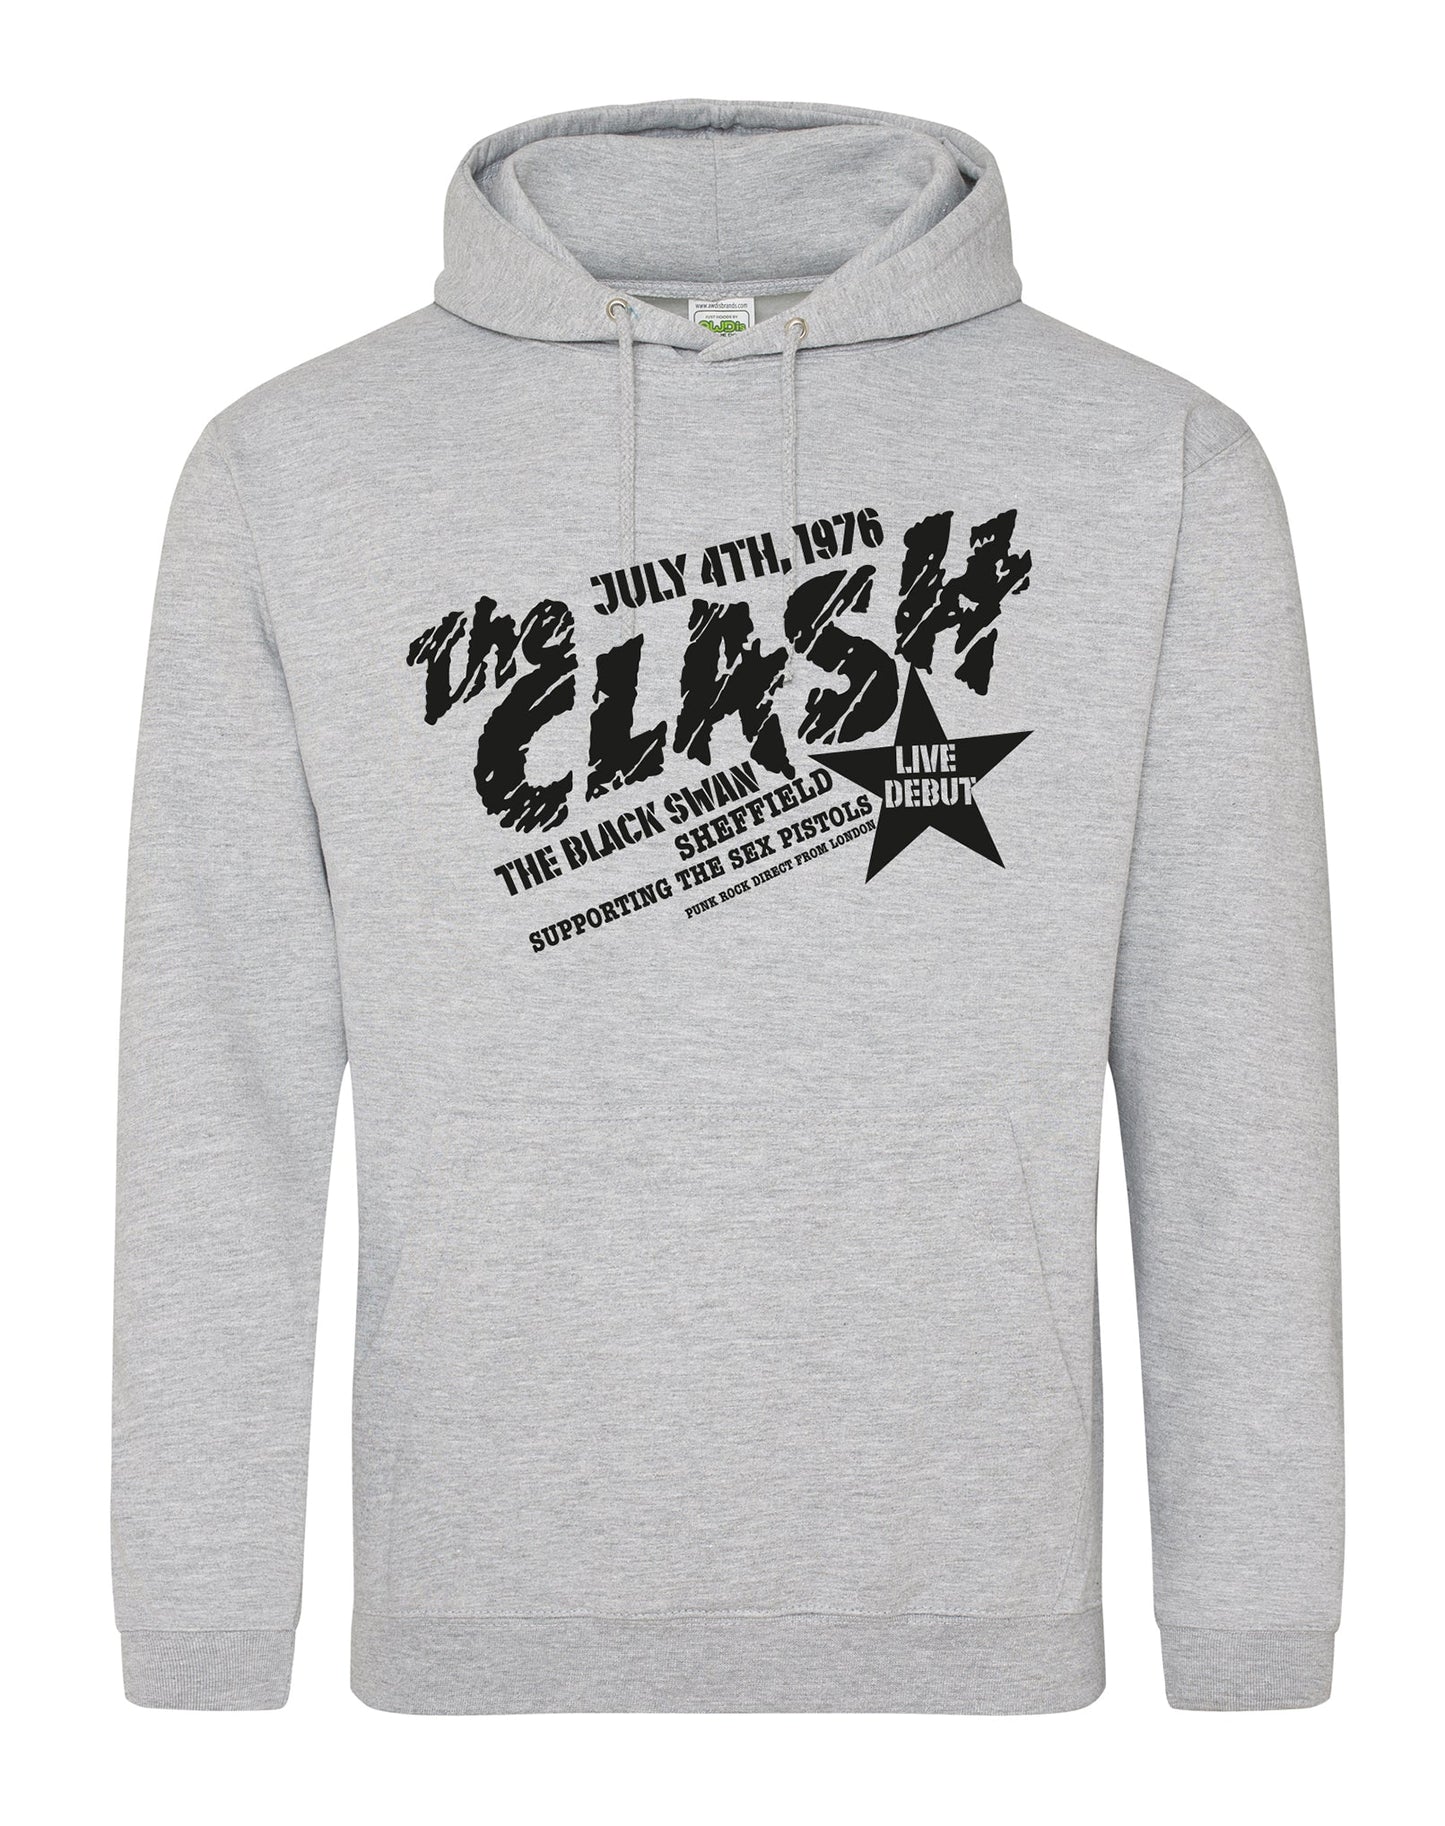 The Clash at the Black Swan - unisex fit hoodie - various colours - Dirty Stop Outs